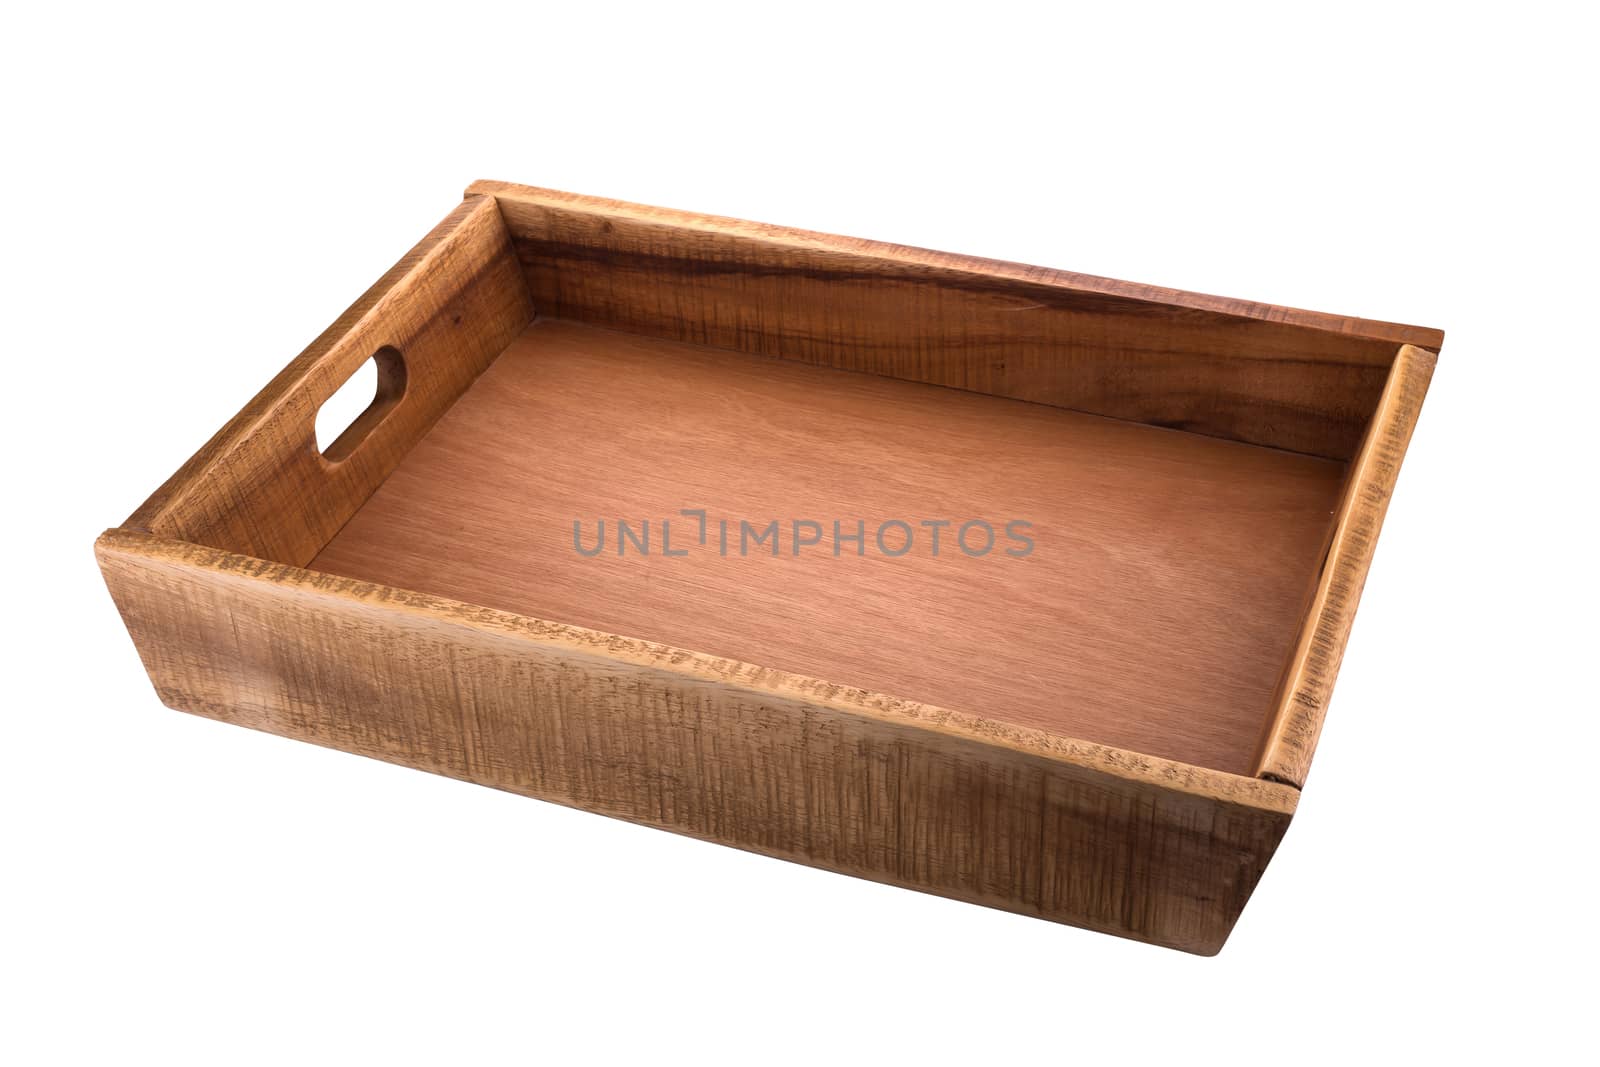 Square wooden tray on a white background.